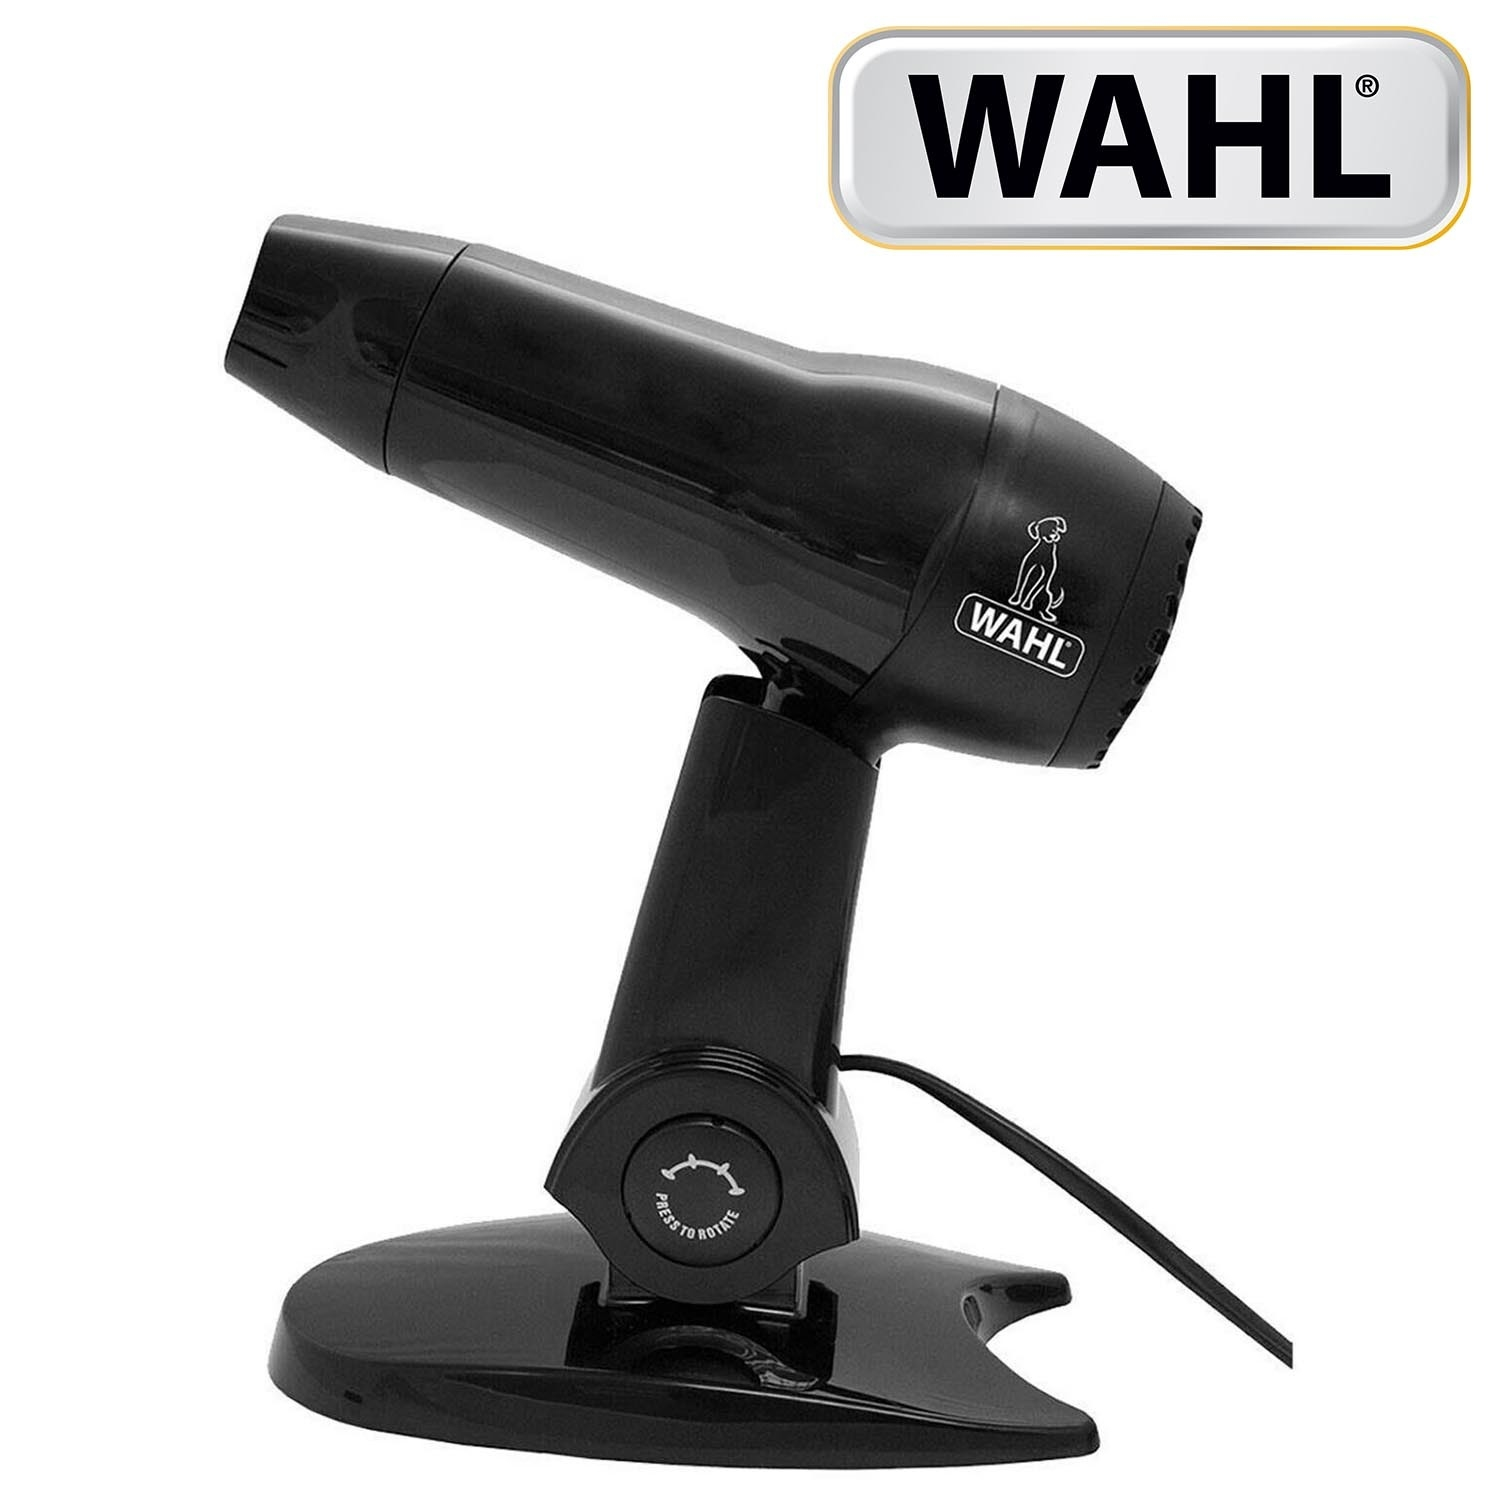 Wahl Hair Dryer Pet with Stand 1800W with 3 Power Settings & Cool Shot  ZX657 5037127008713 | eBay